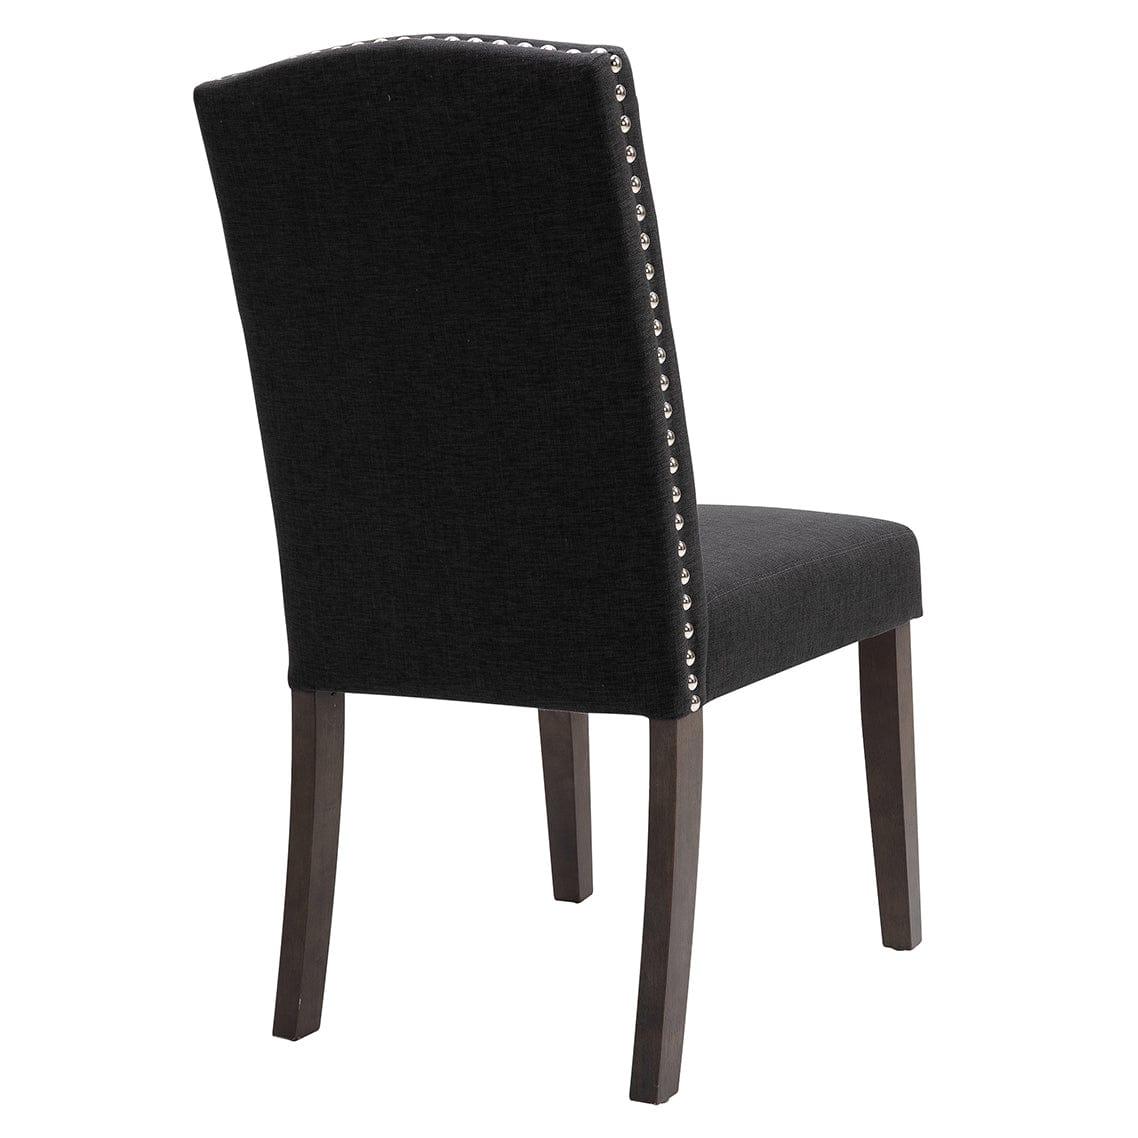 House Journey Lethbridge Dining Chair - Charcoal